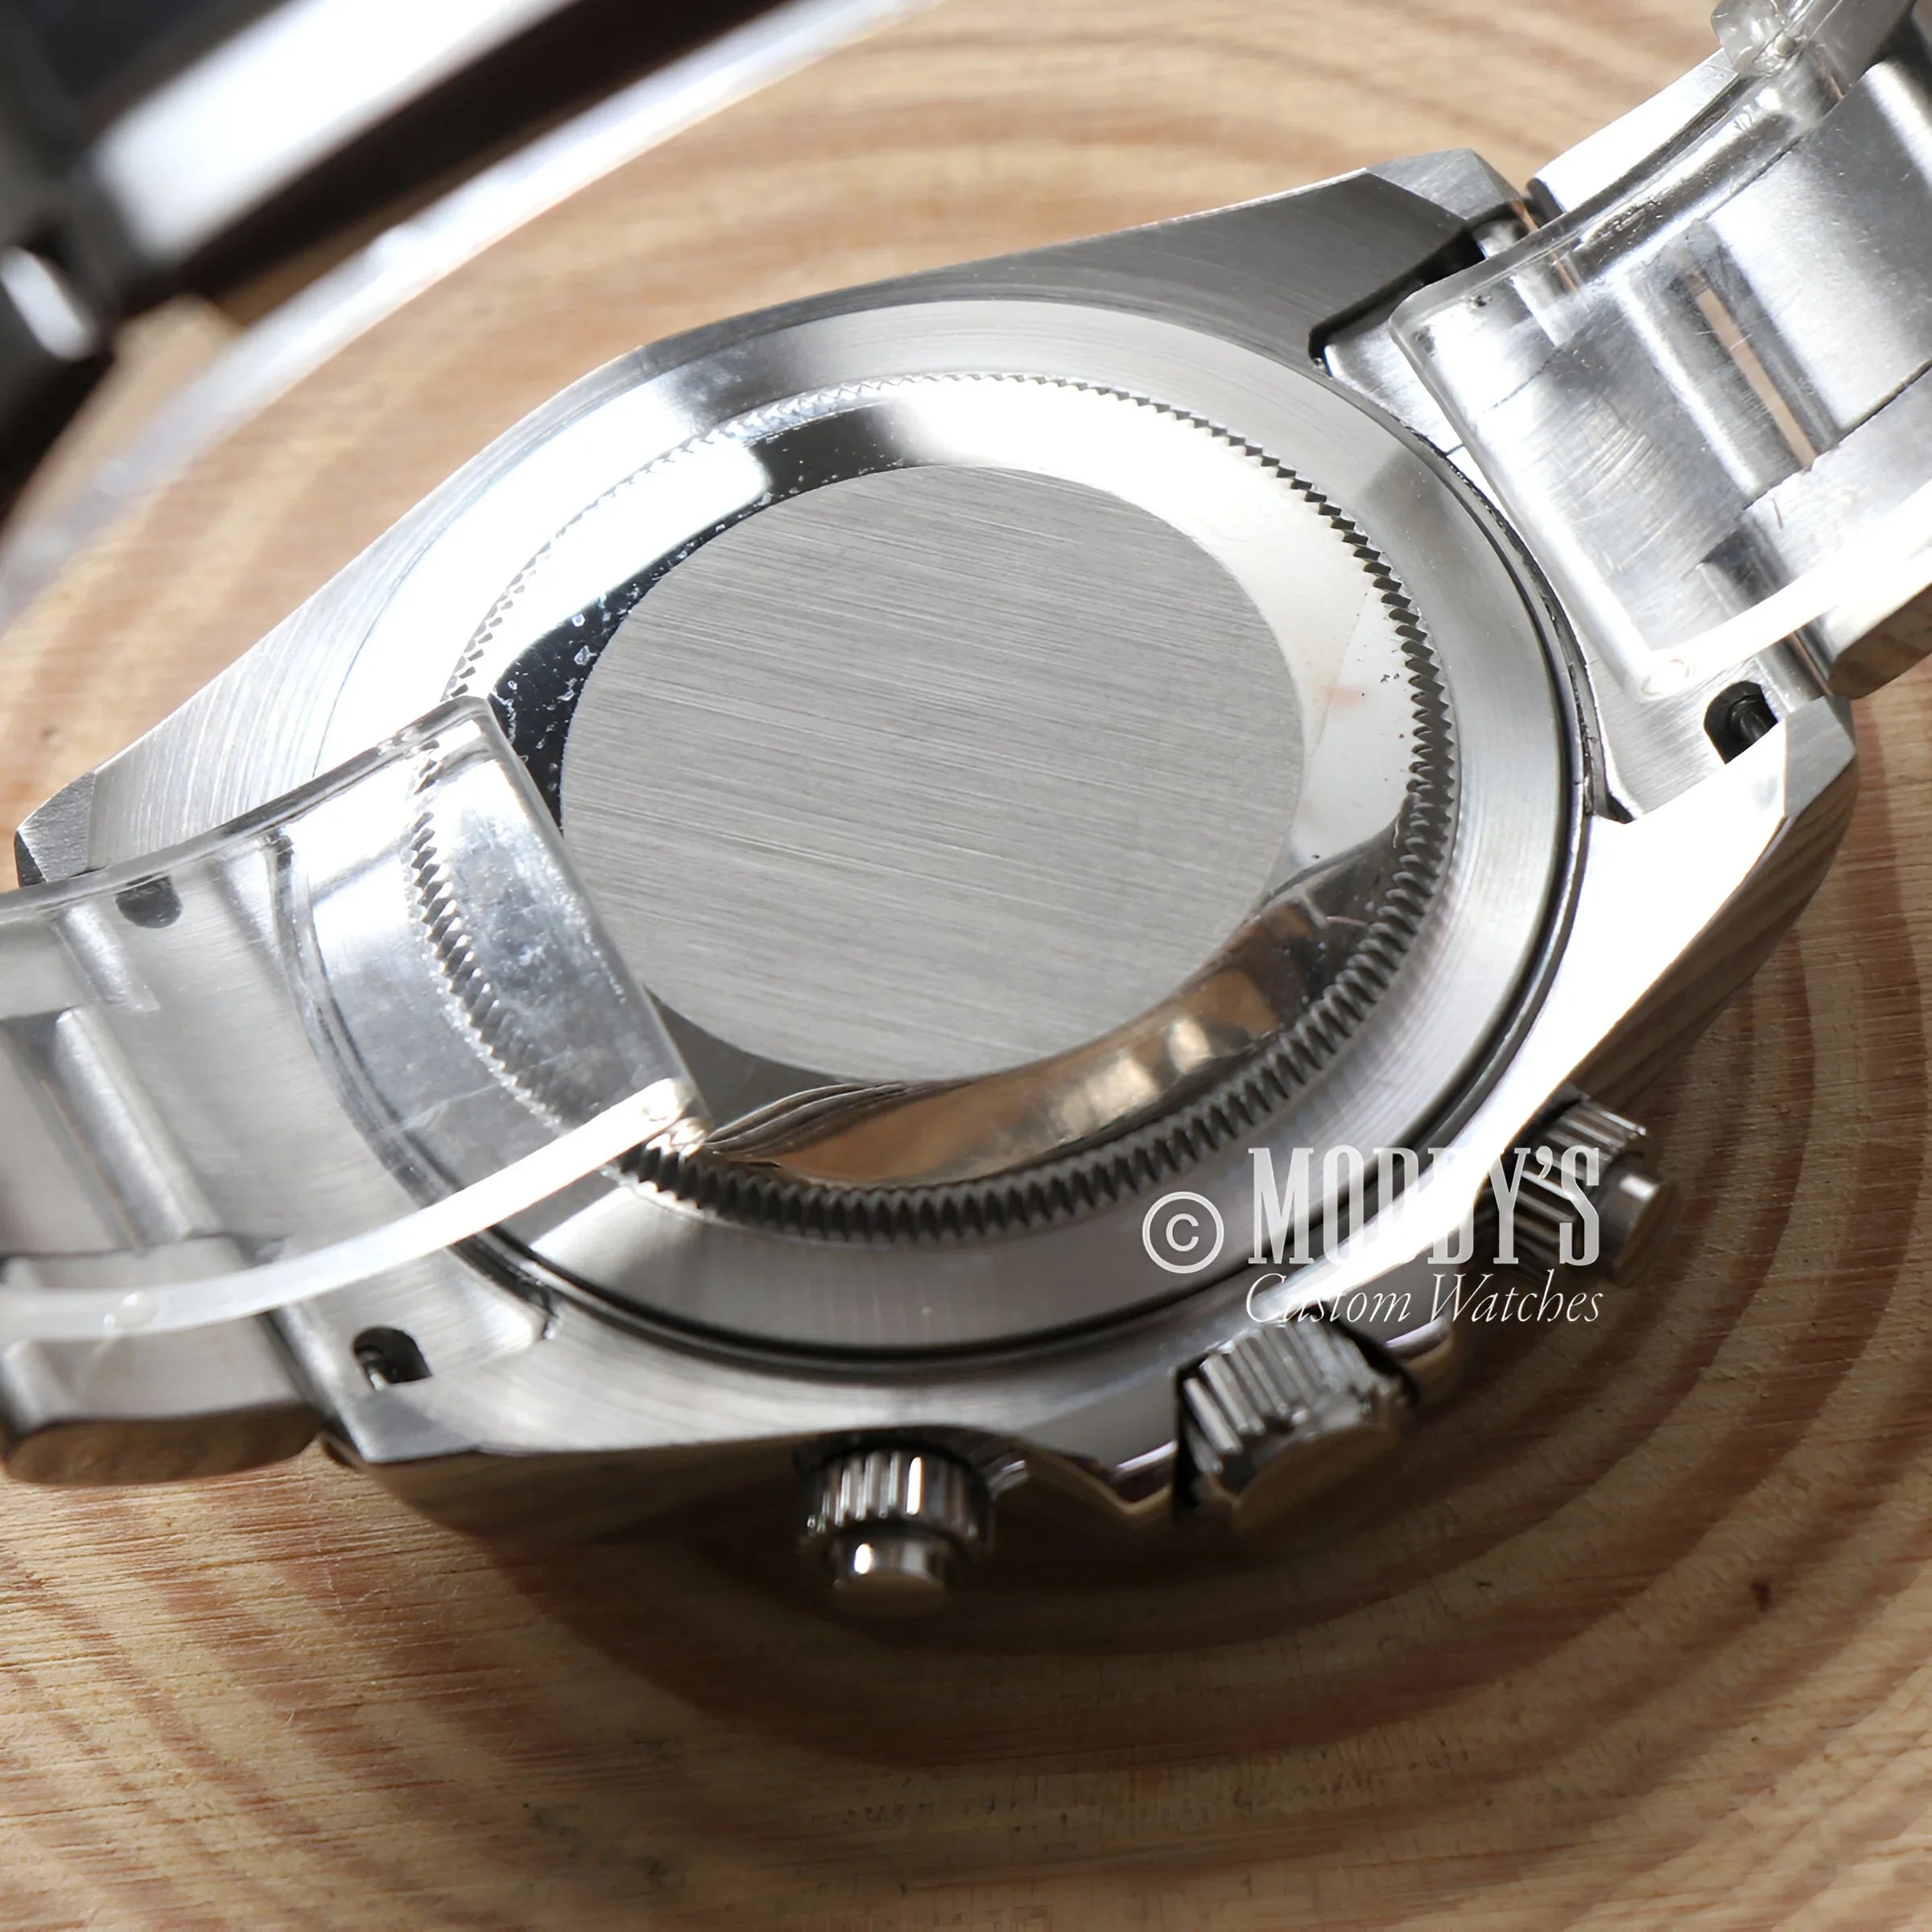 Seitona Silver - Blue Watch With Vk63 Hybrid Movement On a Sleek Wooden Table